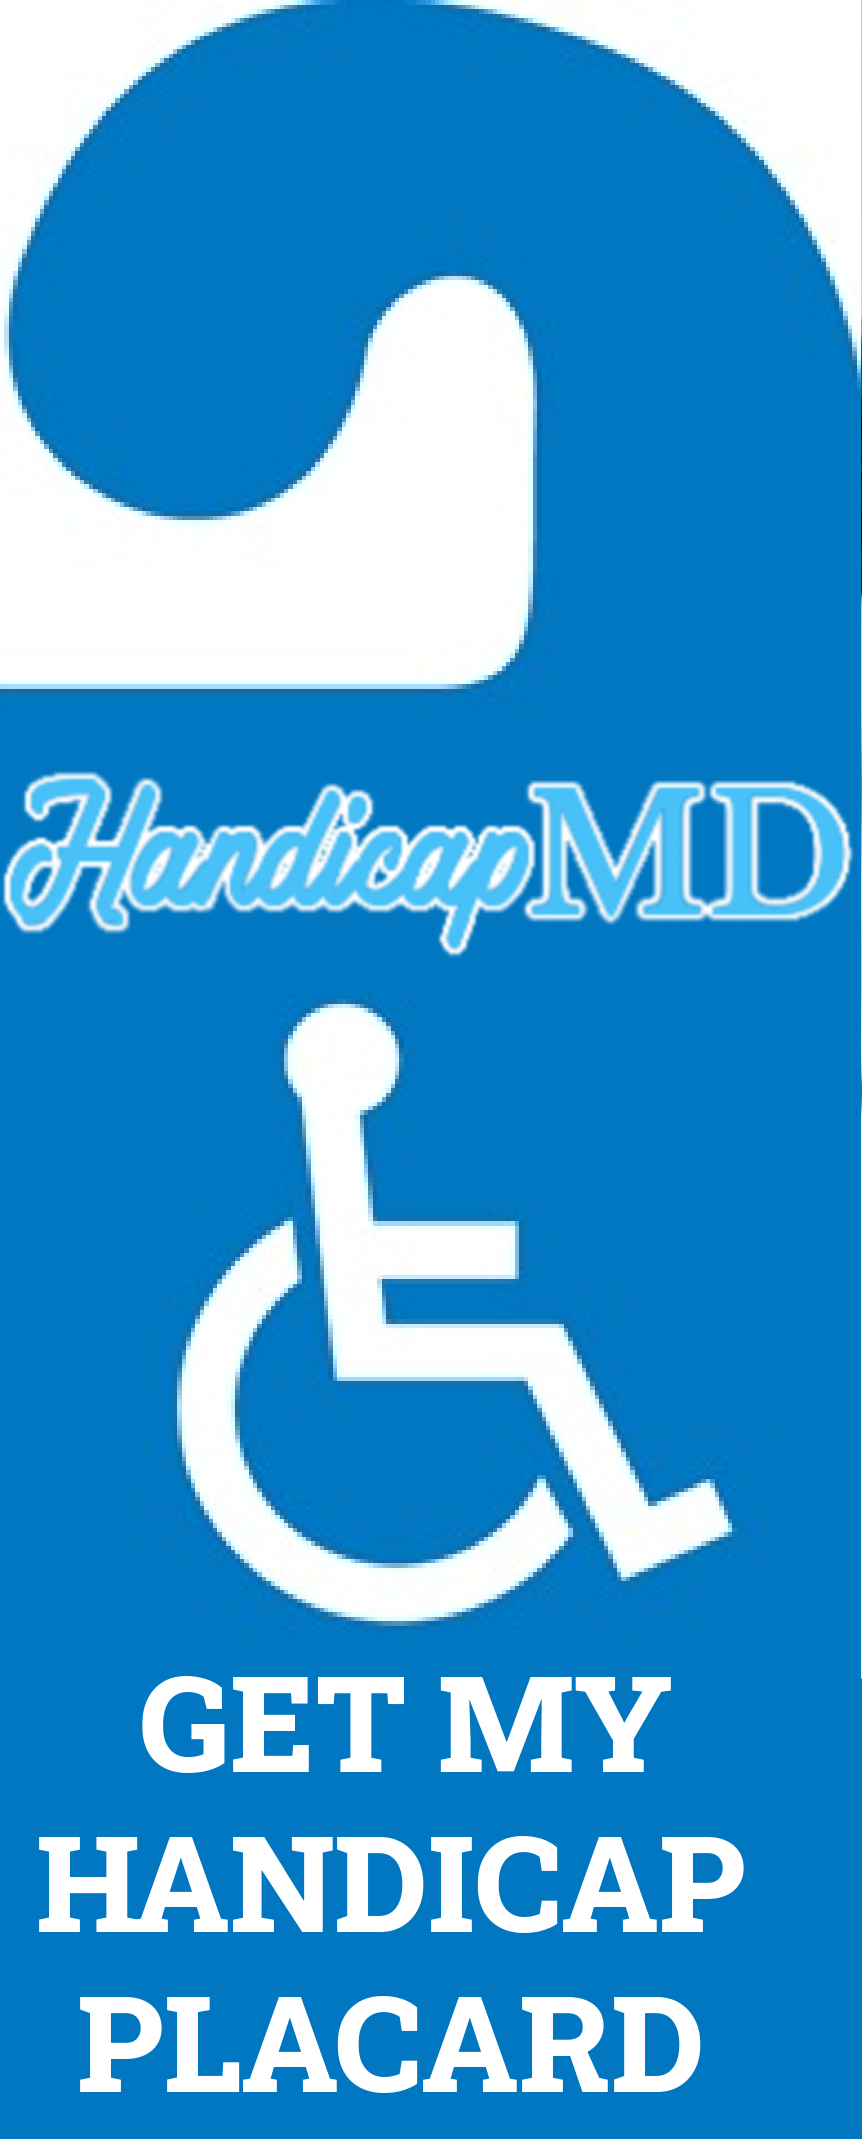 How To Get A Handicap Parking Placard Renewal in Washington